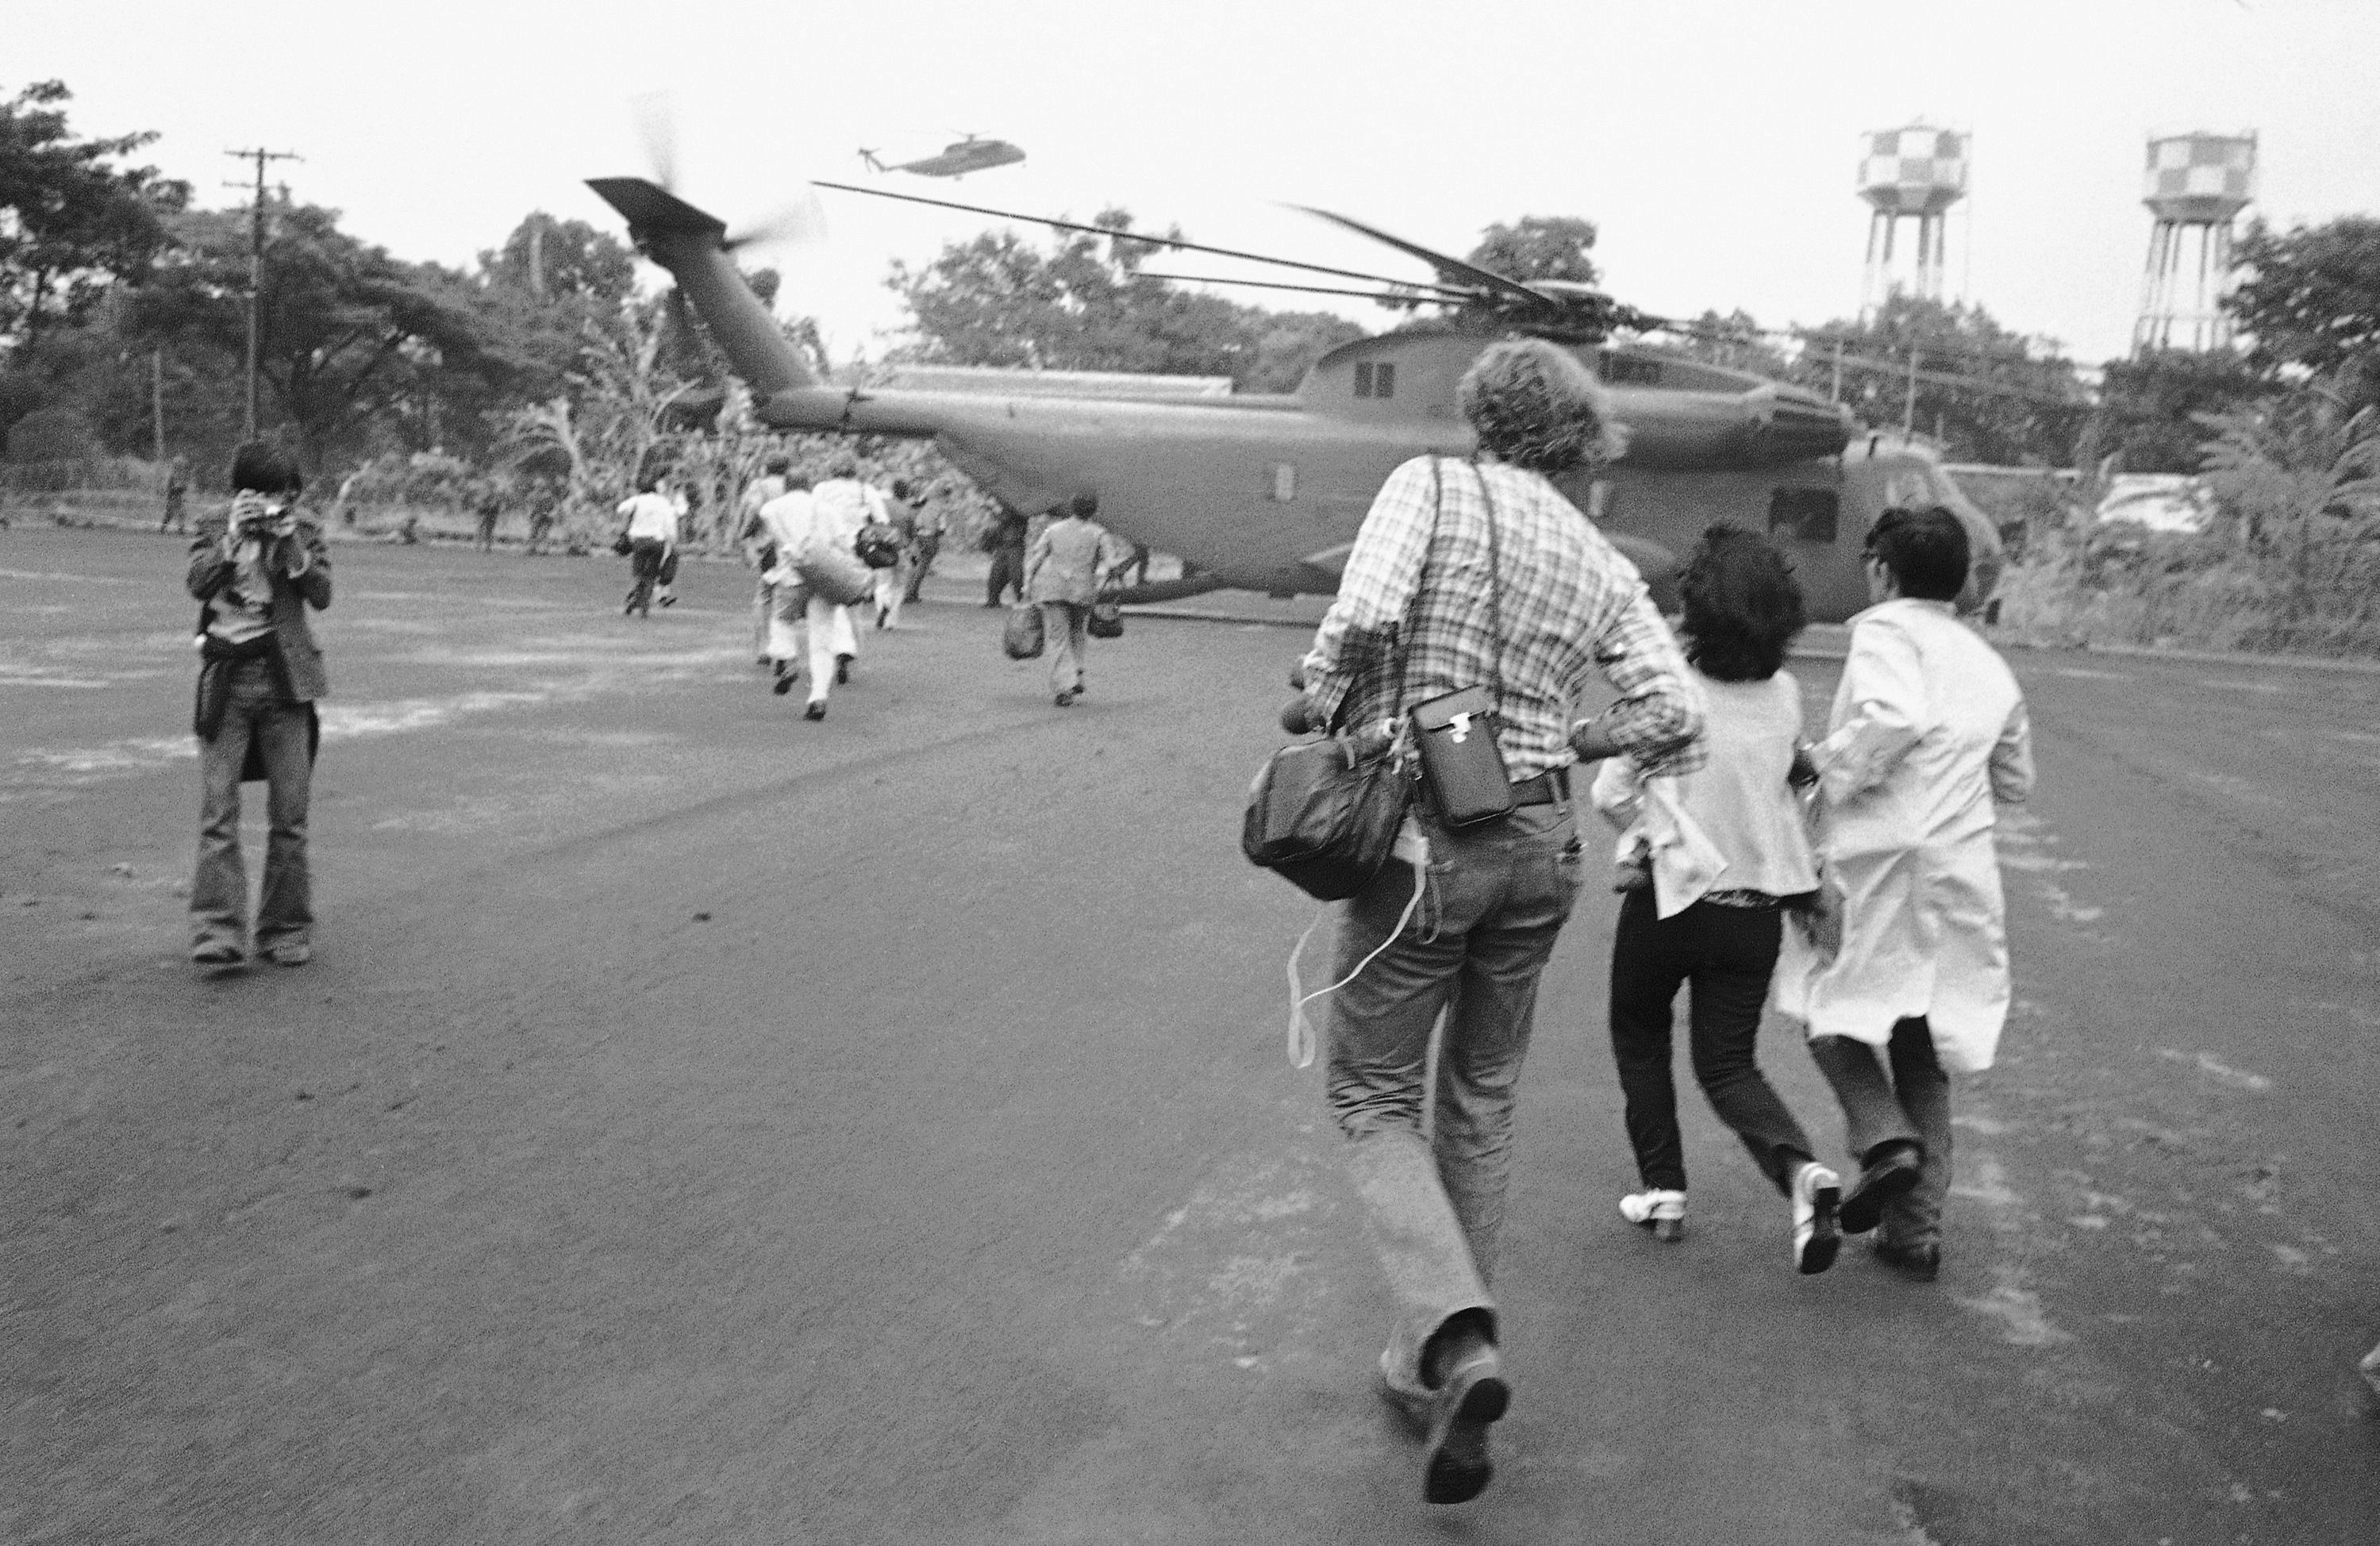 Americans and Vietnamese run for a U.S. Marine helicopter in Saigon during the evacuation of the city, April 29, 1975. (AP Photo)